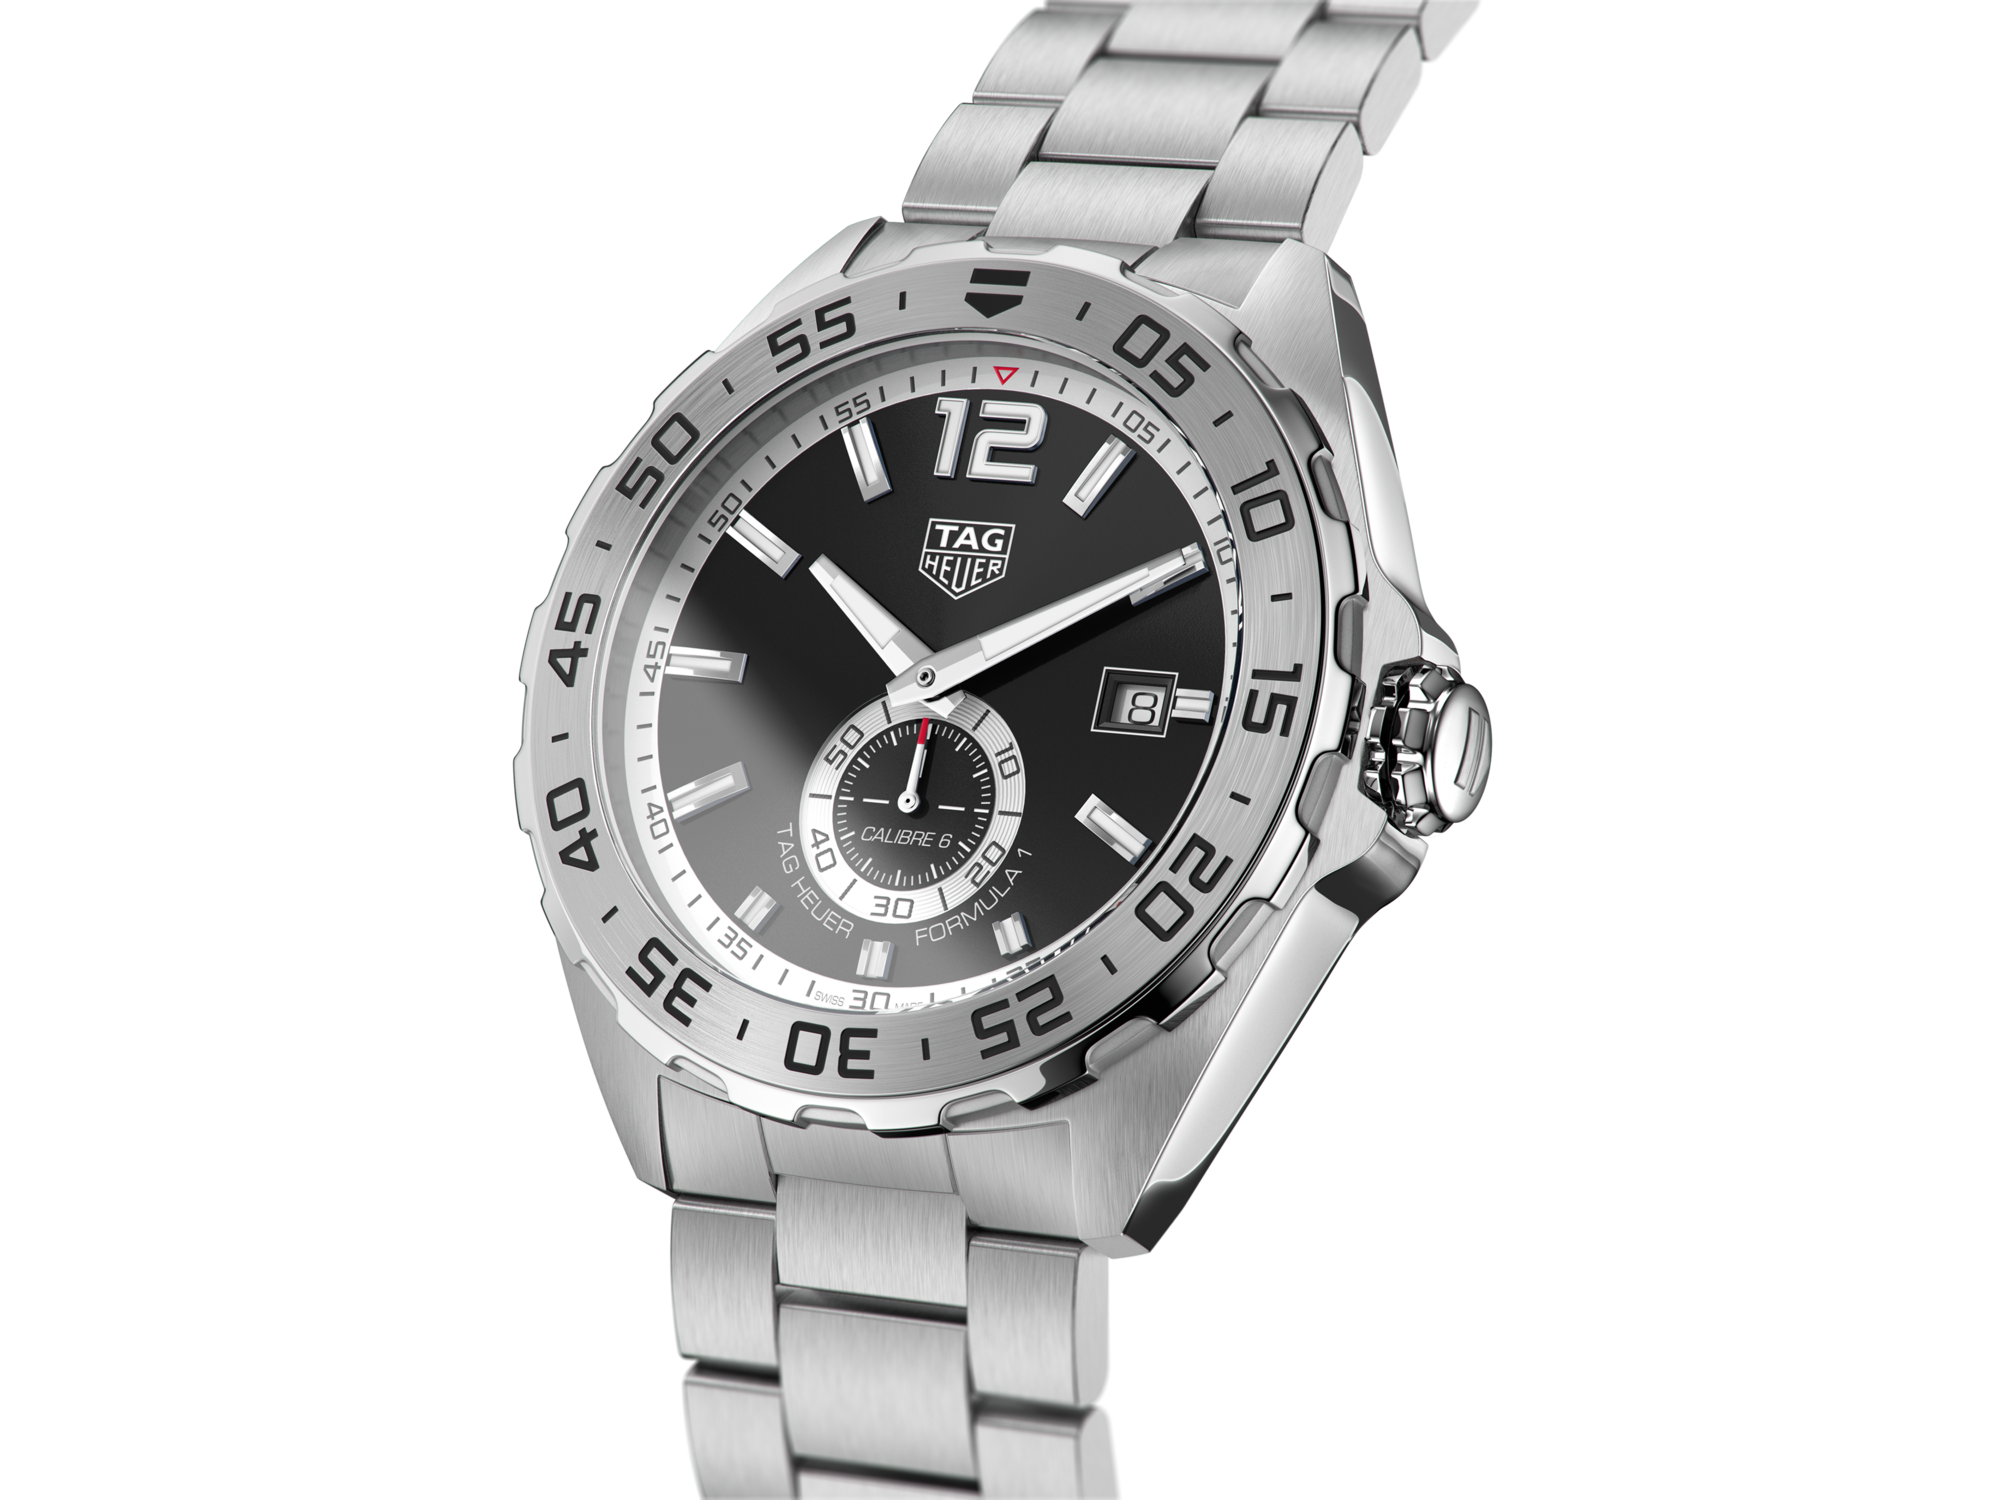 TAG Heuer Good Product [TAG HEUER] TAG Heuer Carrera Calibre 5 Day-Date WAR201B-1 Automatic Winding Men's [Used]